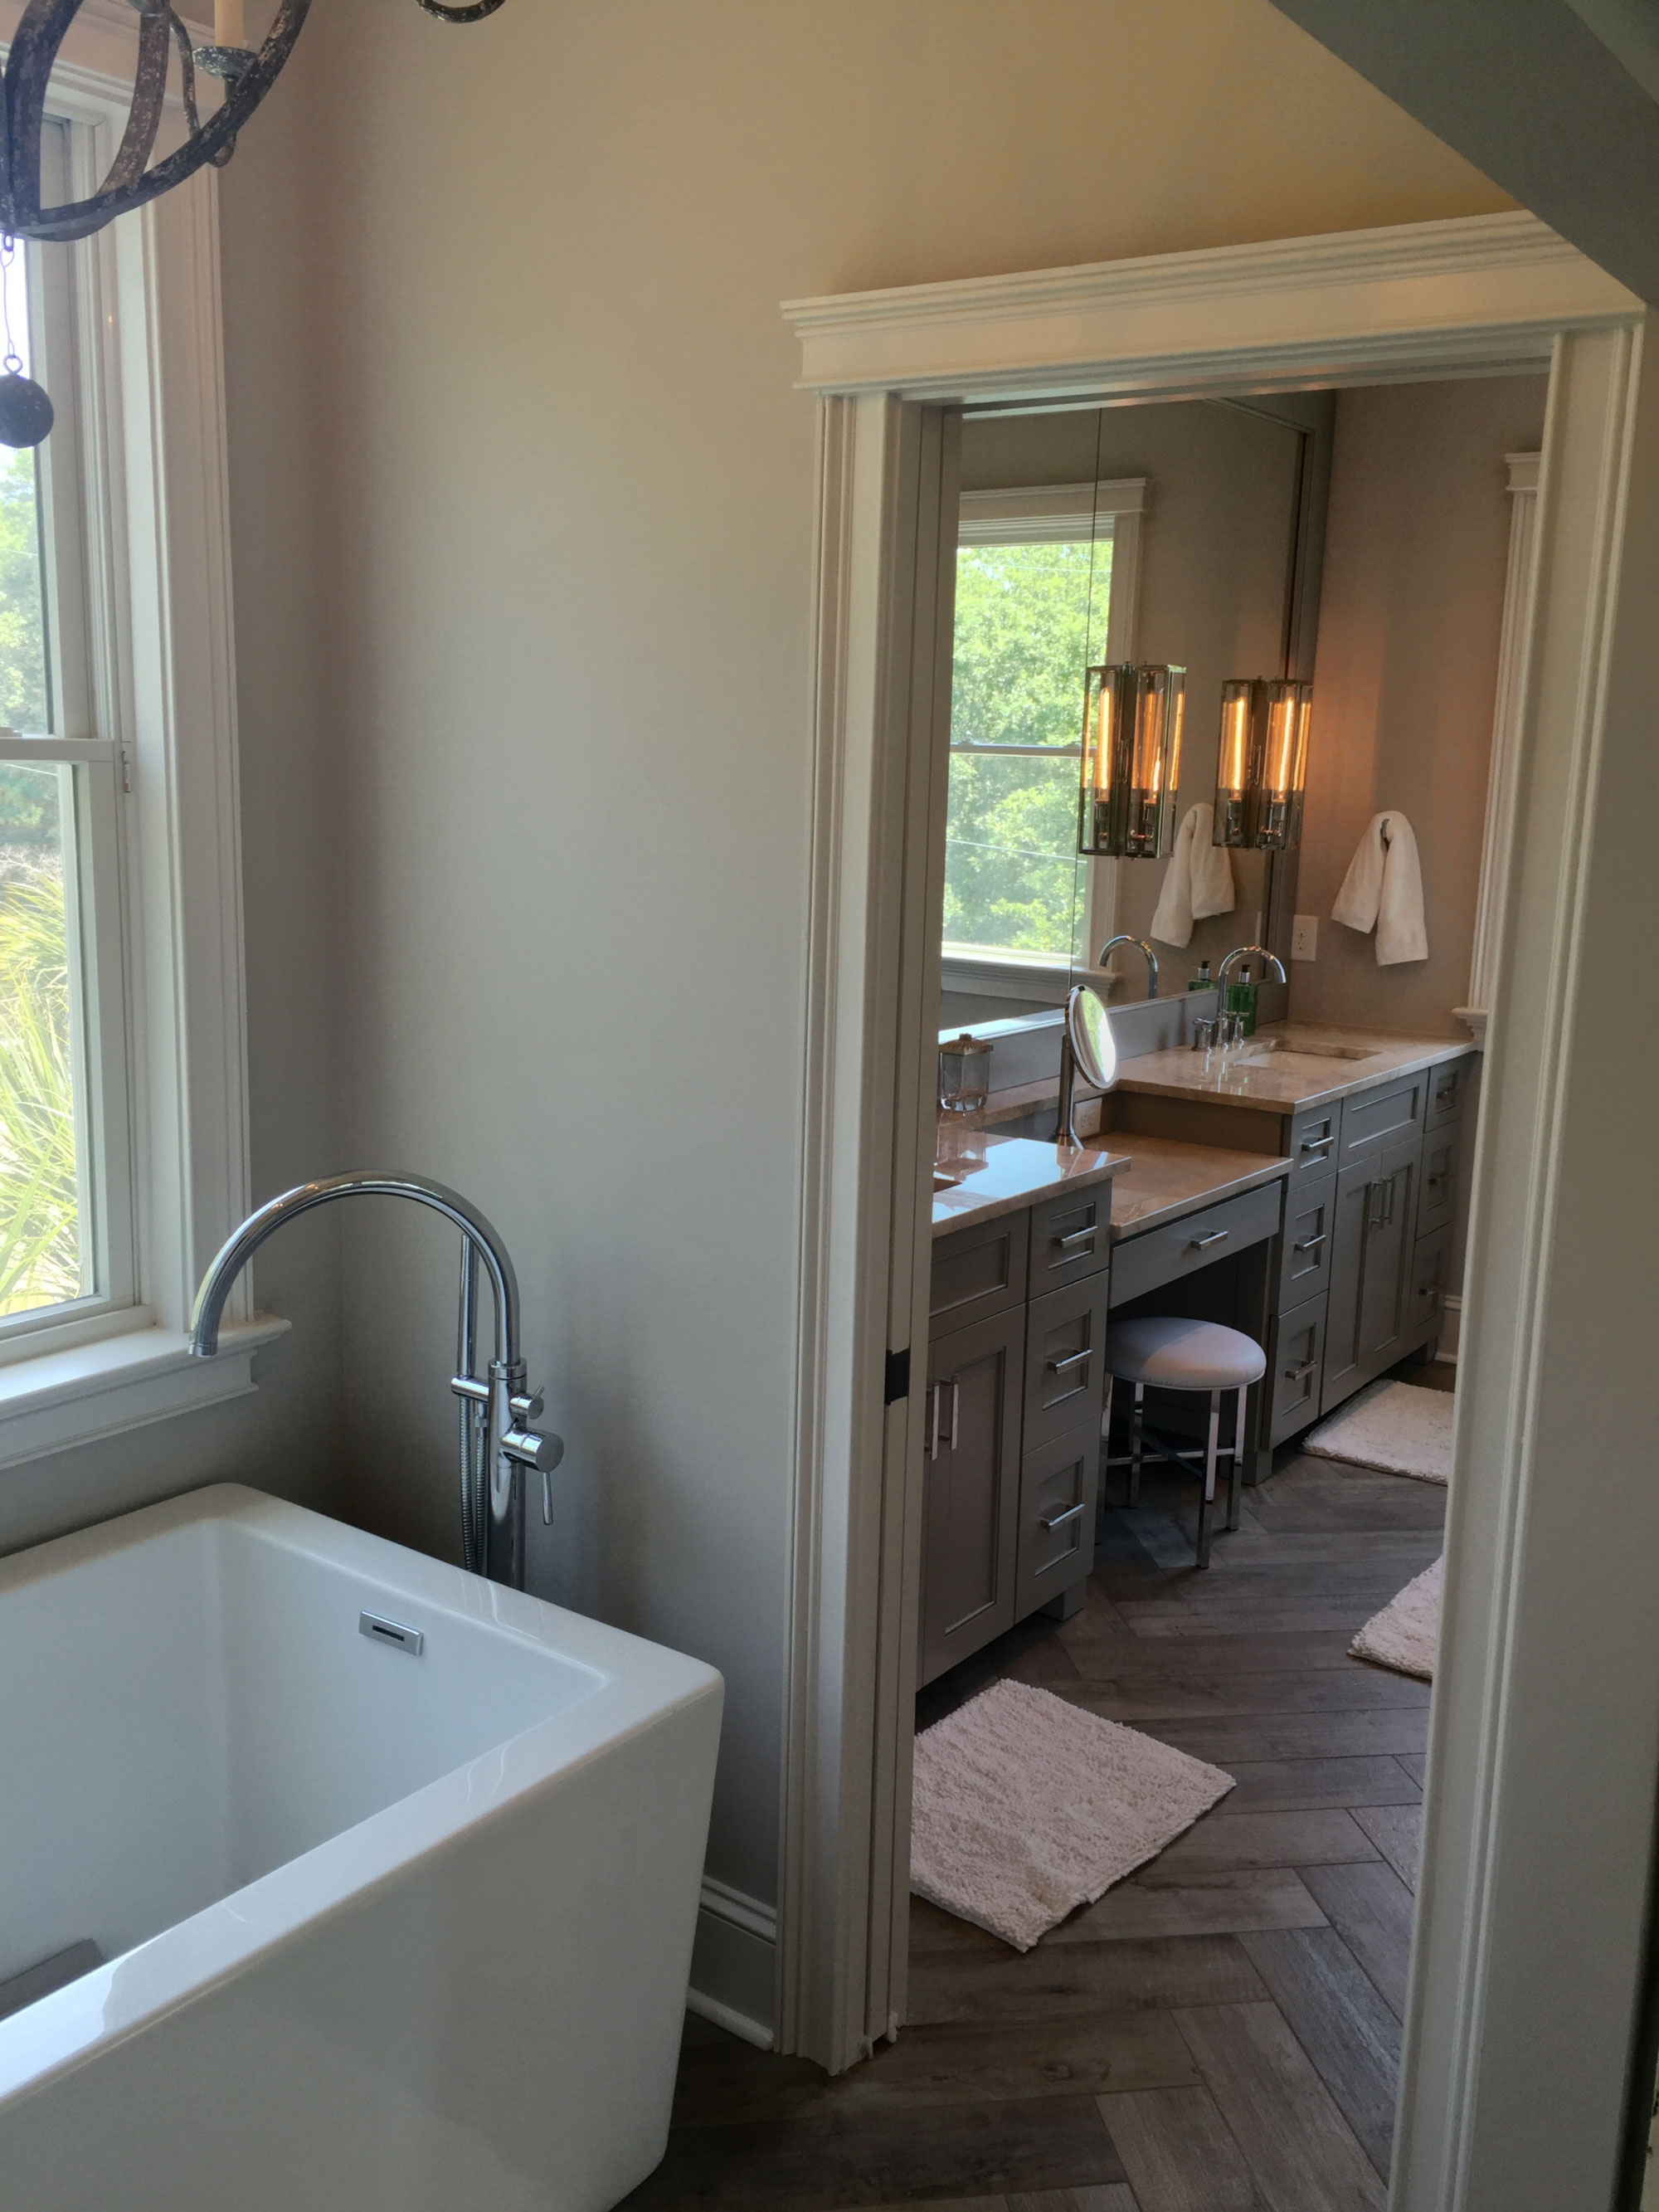 New master bath ensuite created by enclosing second story balcony and porch